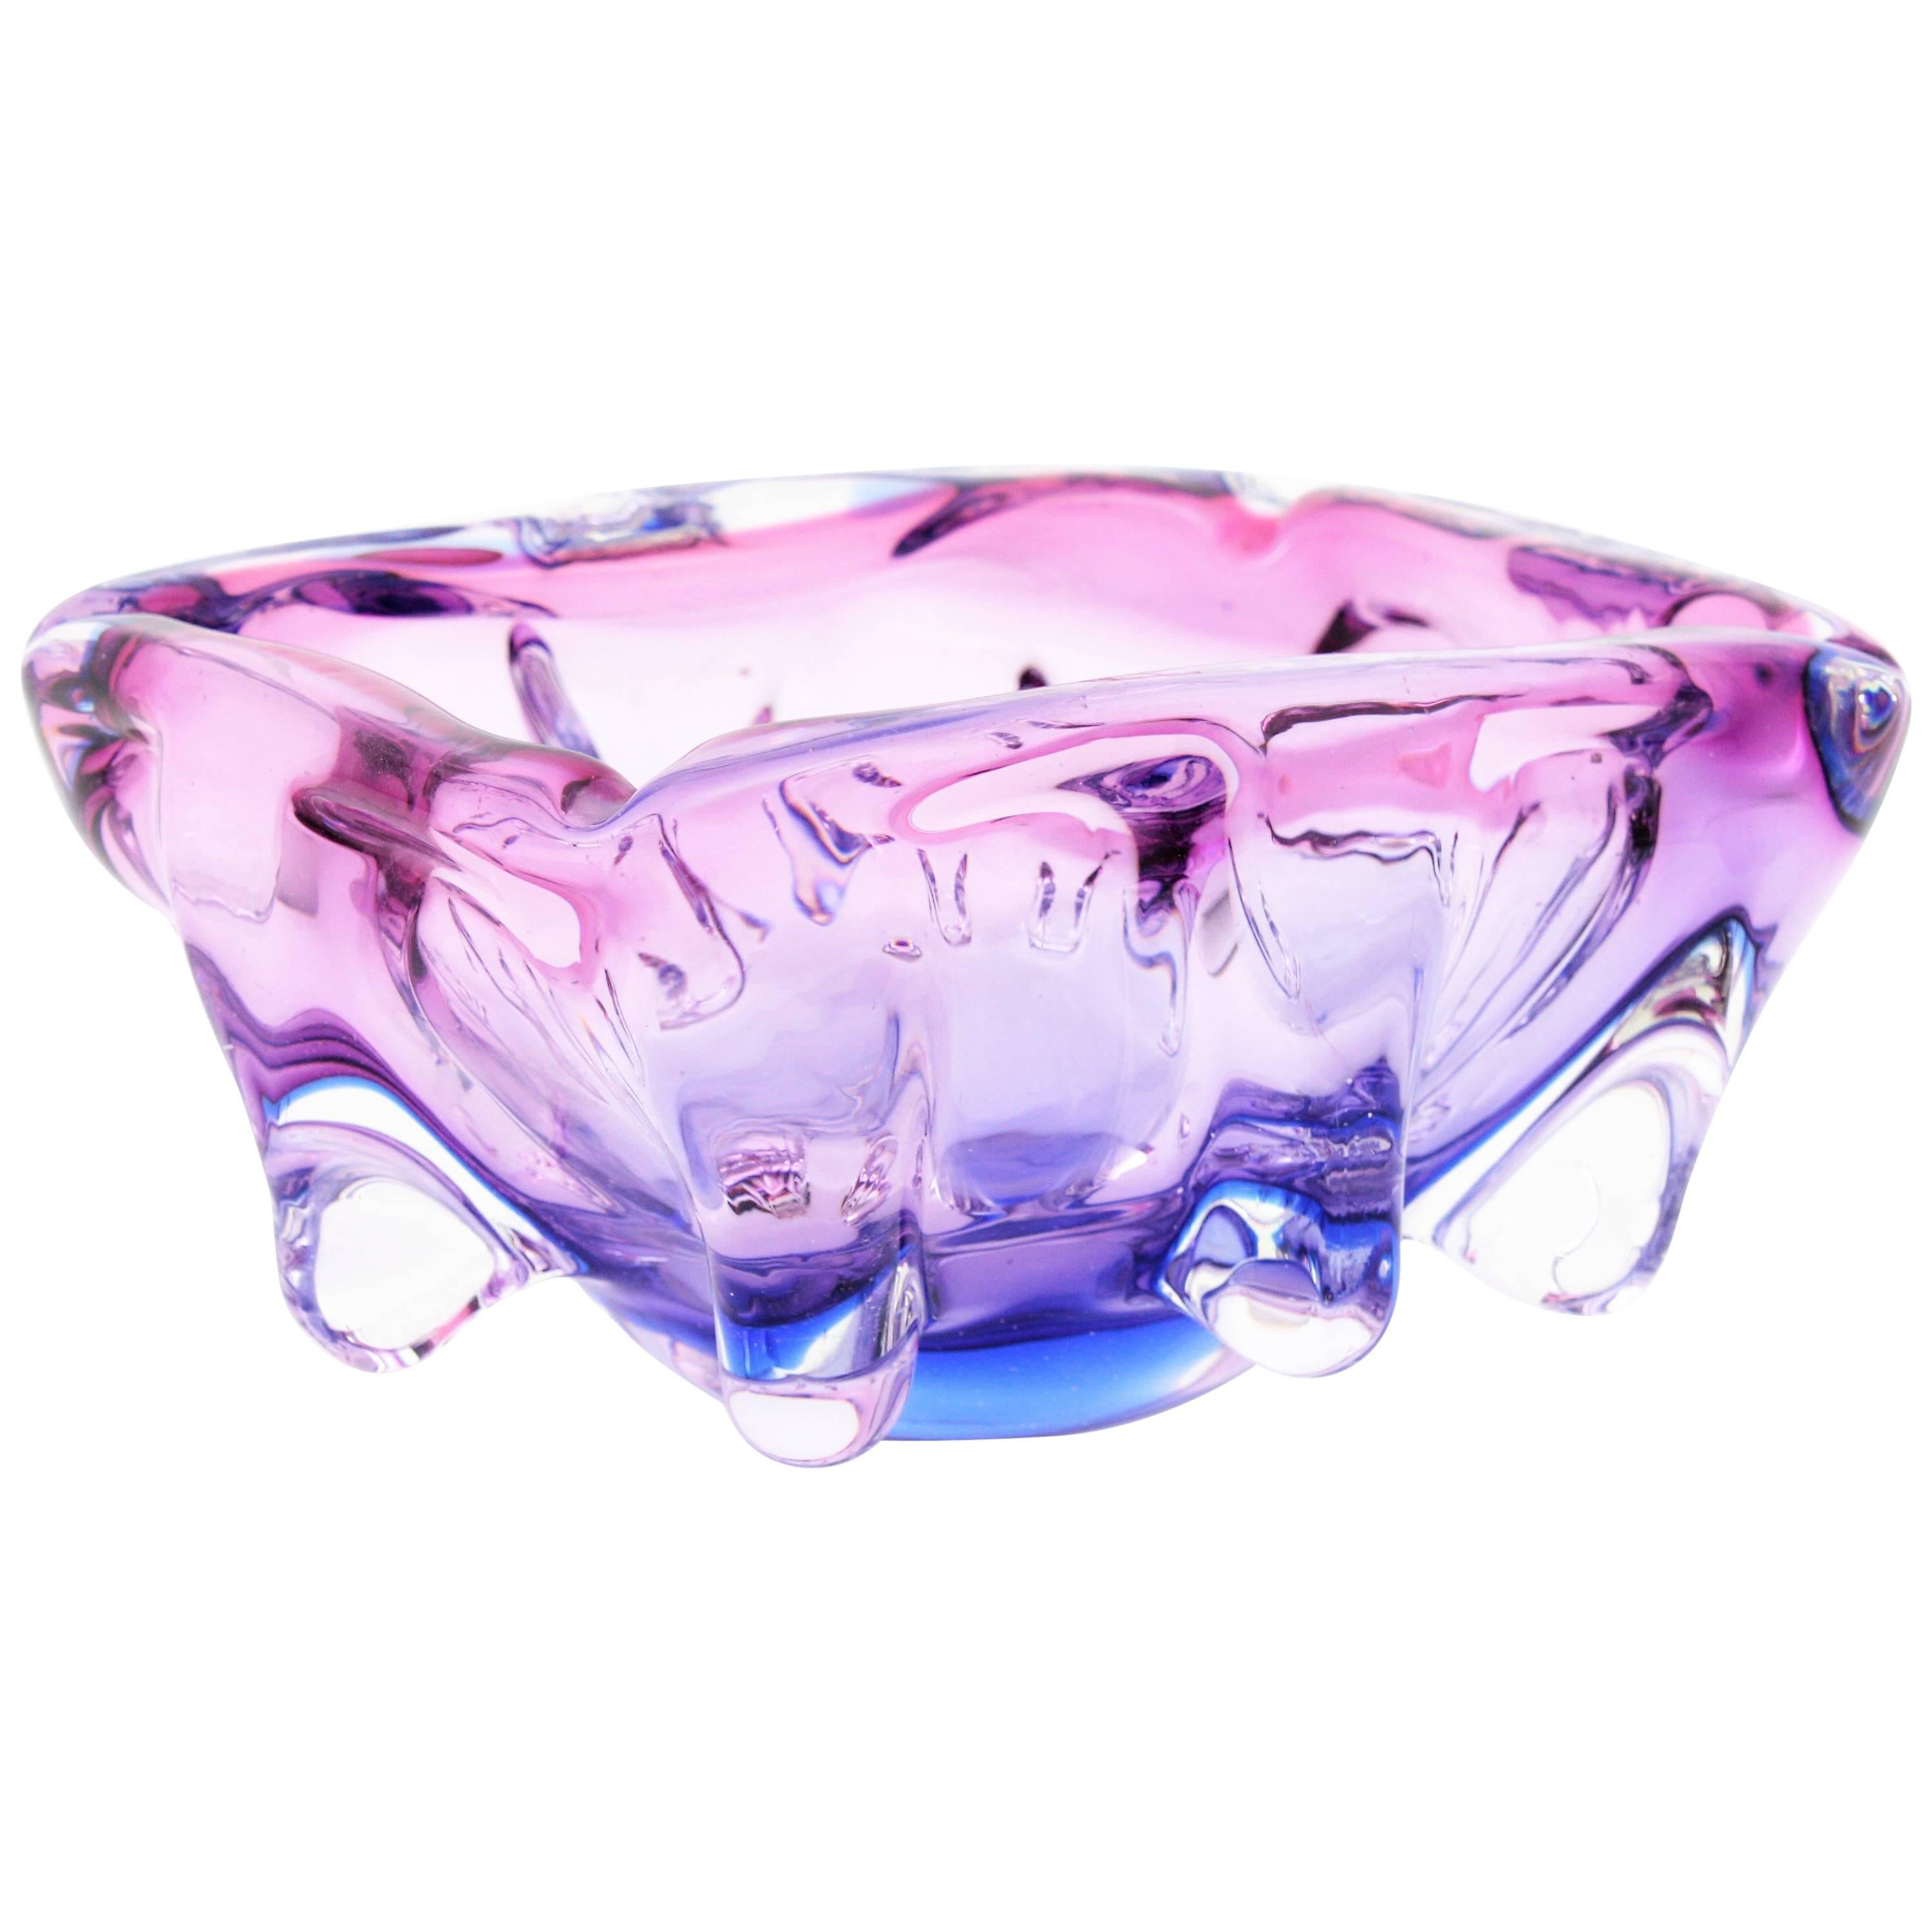 Impressive hand blown Murano Art glass bowl / centerpiece in a degrade of colors from pink to blue. Attributed to Seguso. Italy, 1960s.
Pink, purple and blue glass submerged into clear glass with Sommerso technique, rectangular design and organic